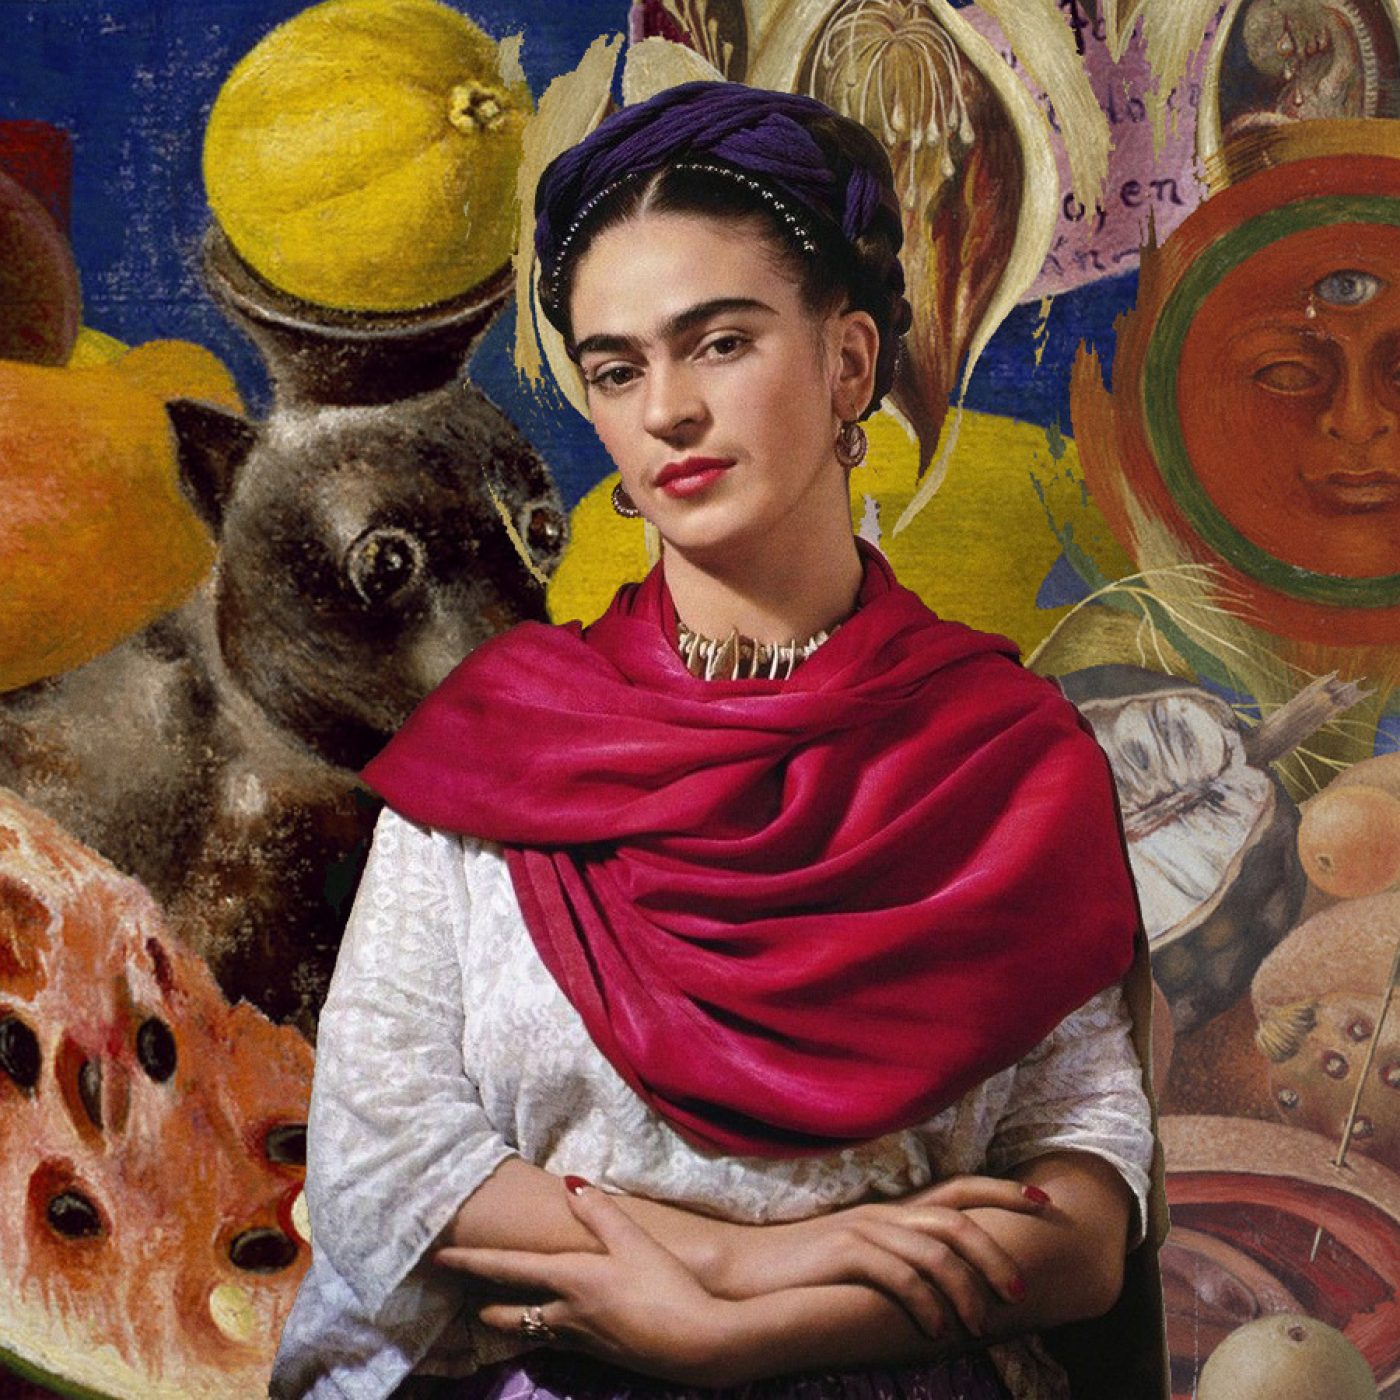 This Exhibition in Dallas Features Lesser Known Art From Frida Kahlo